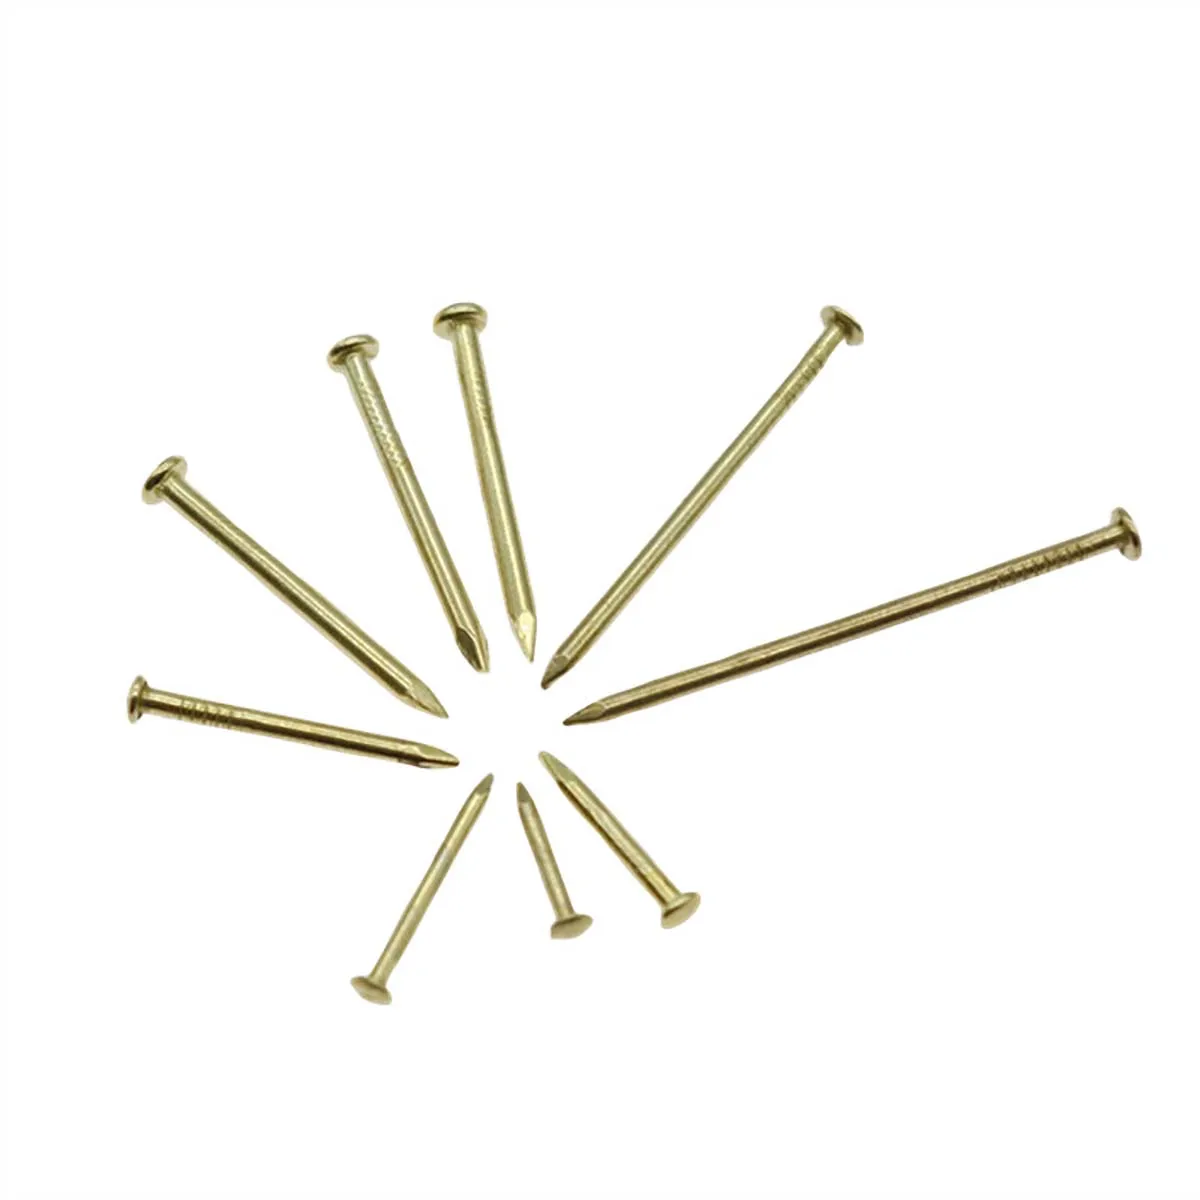 

10Pcs Golden Diameter 1.2mm 1.5mm 1.8mm Copper Plated Iron Small Mini Round Head Nail Tack Model Making Toy Assembly Production